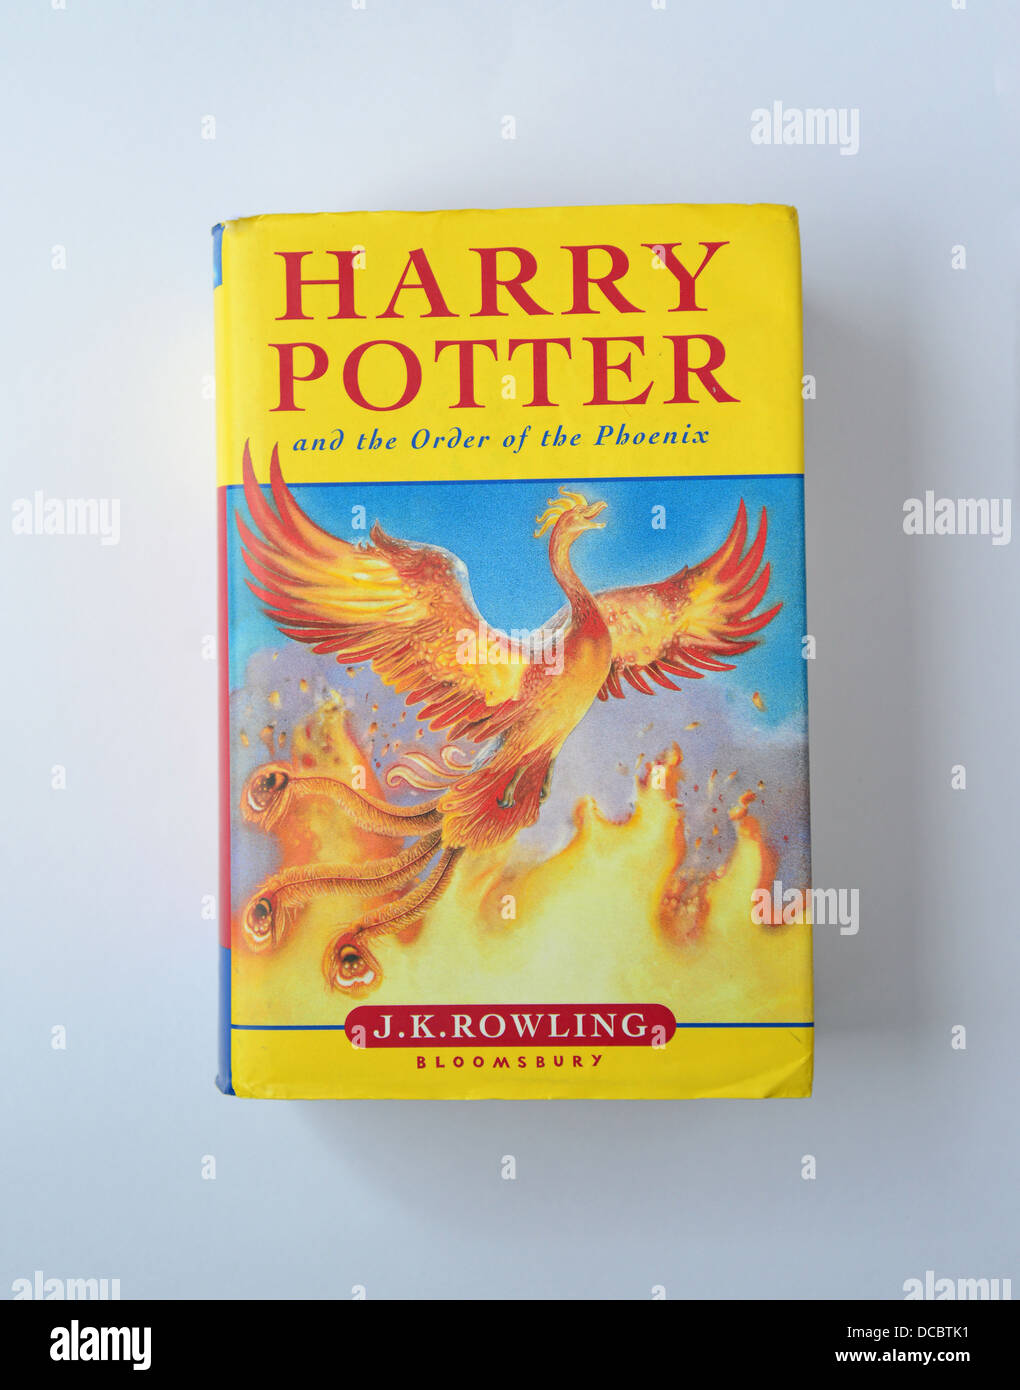 Harry Potter and the Deathly Hallows - Movie Poster (Advance Style -  Hogwarts On Fire) (Size: 24 inches x 36 inches)